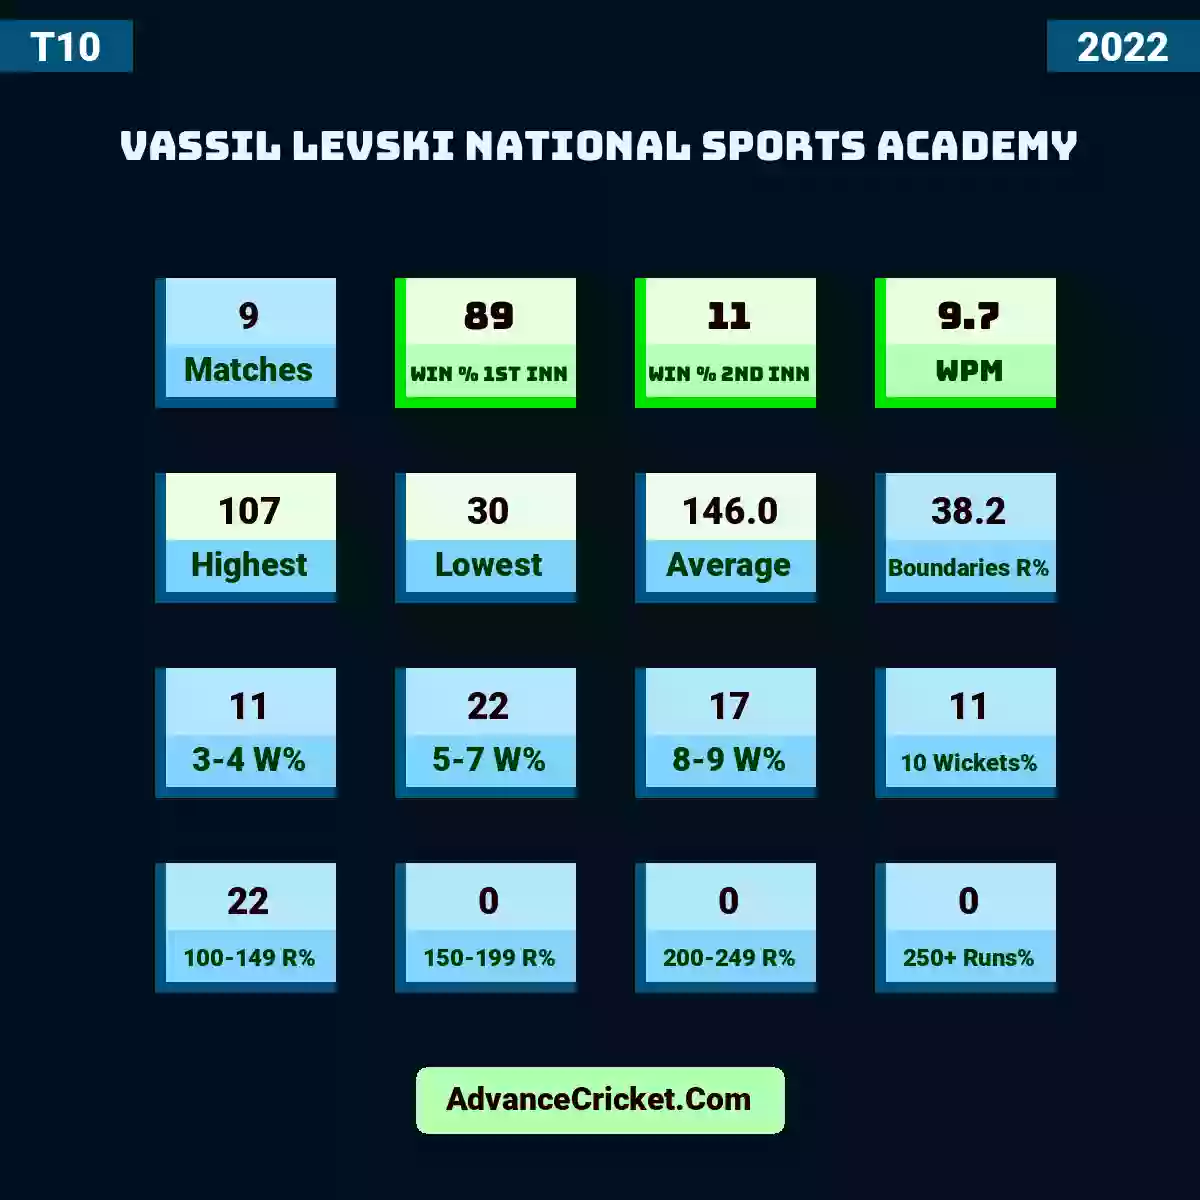 Image showing Vassil Levski National Sports Academy with Matches: 9, Win % 1st Inn: 89, Win % 2nd Inn: 11, WPM: 9.7, Highest: 107, Lowest: 30, Average: 146.0, Boundaries R%: 38.2, 3-4 W%: 11, 5-7 W%: 22, 8-9 W%: 17, 10 Wickets%: 11, 100-149 R%: 22, 150-199 R%: 0, 200-249 R%: 0, 250+ Runs%: 0.